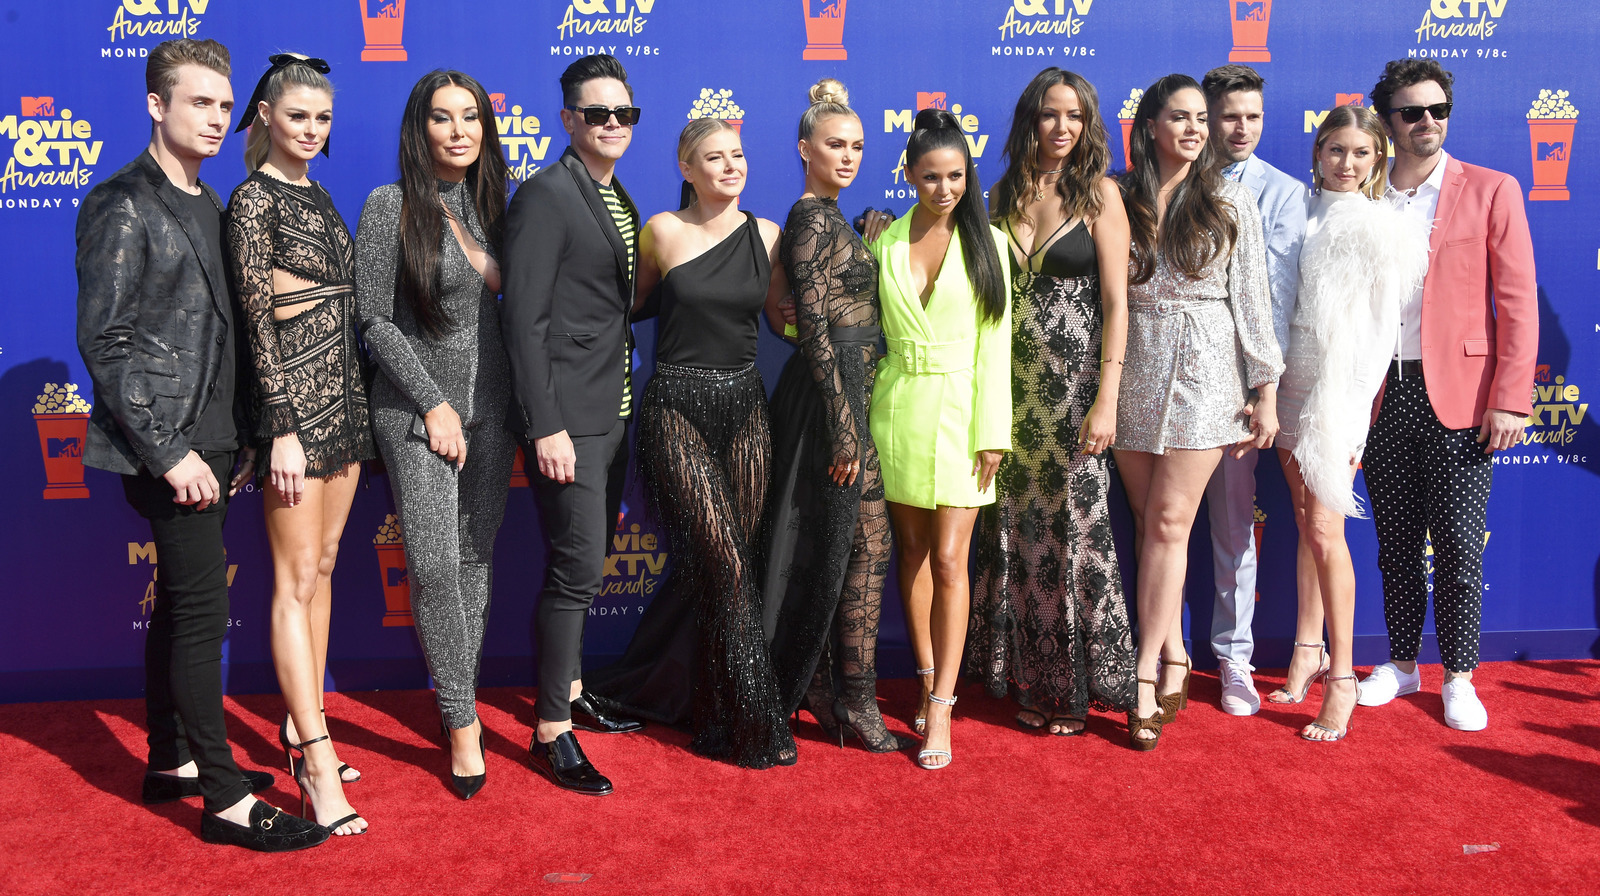 Here's How You Can Watch Every Episode Of Vanderpump Rules